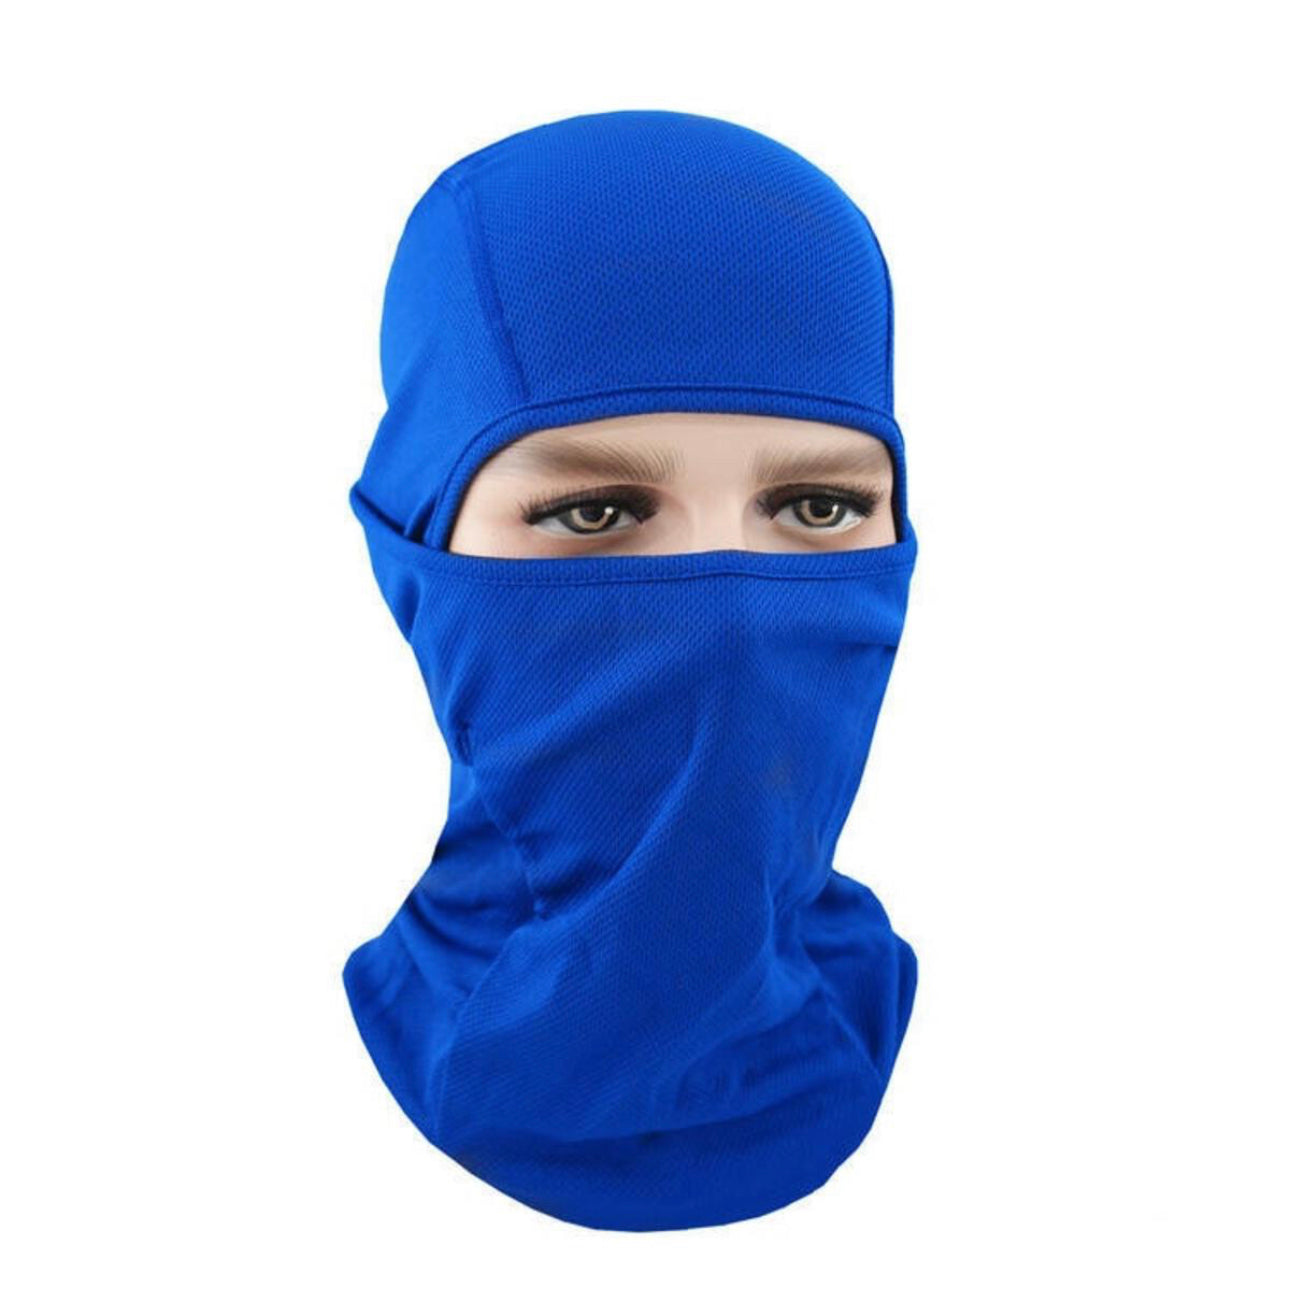 Features Sea to summit Barrier Face Mask